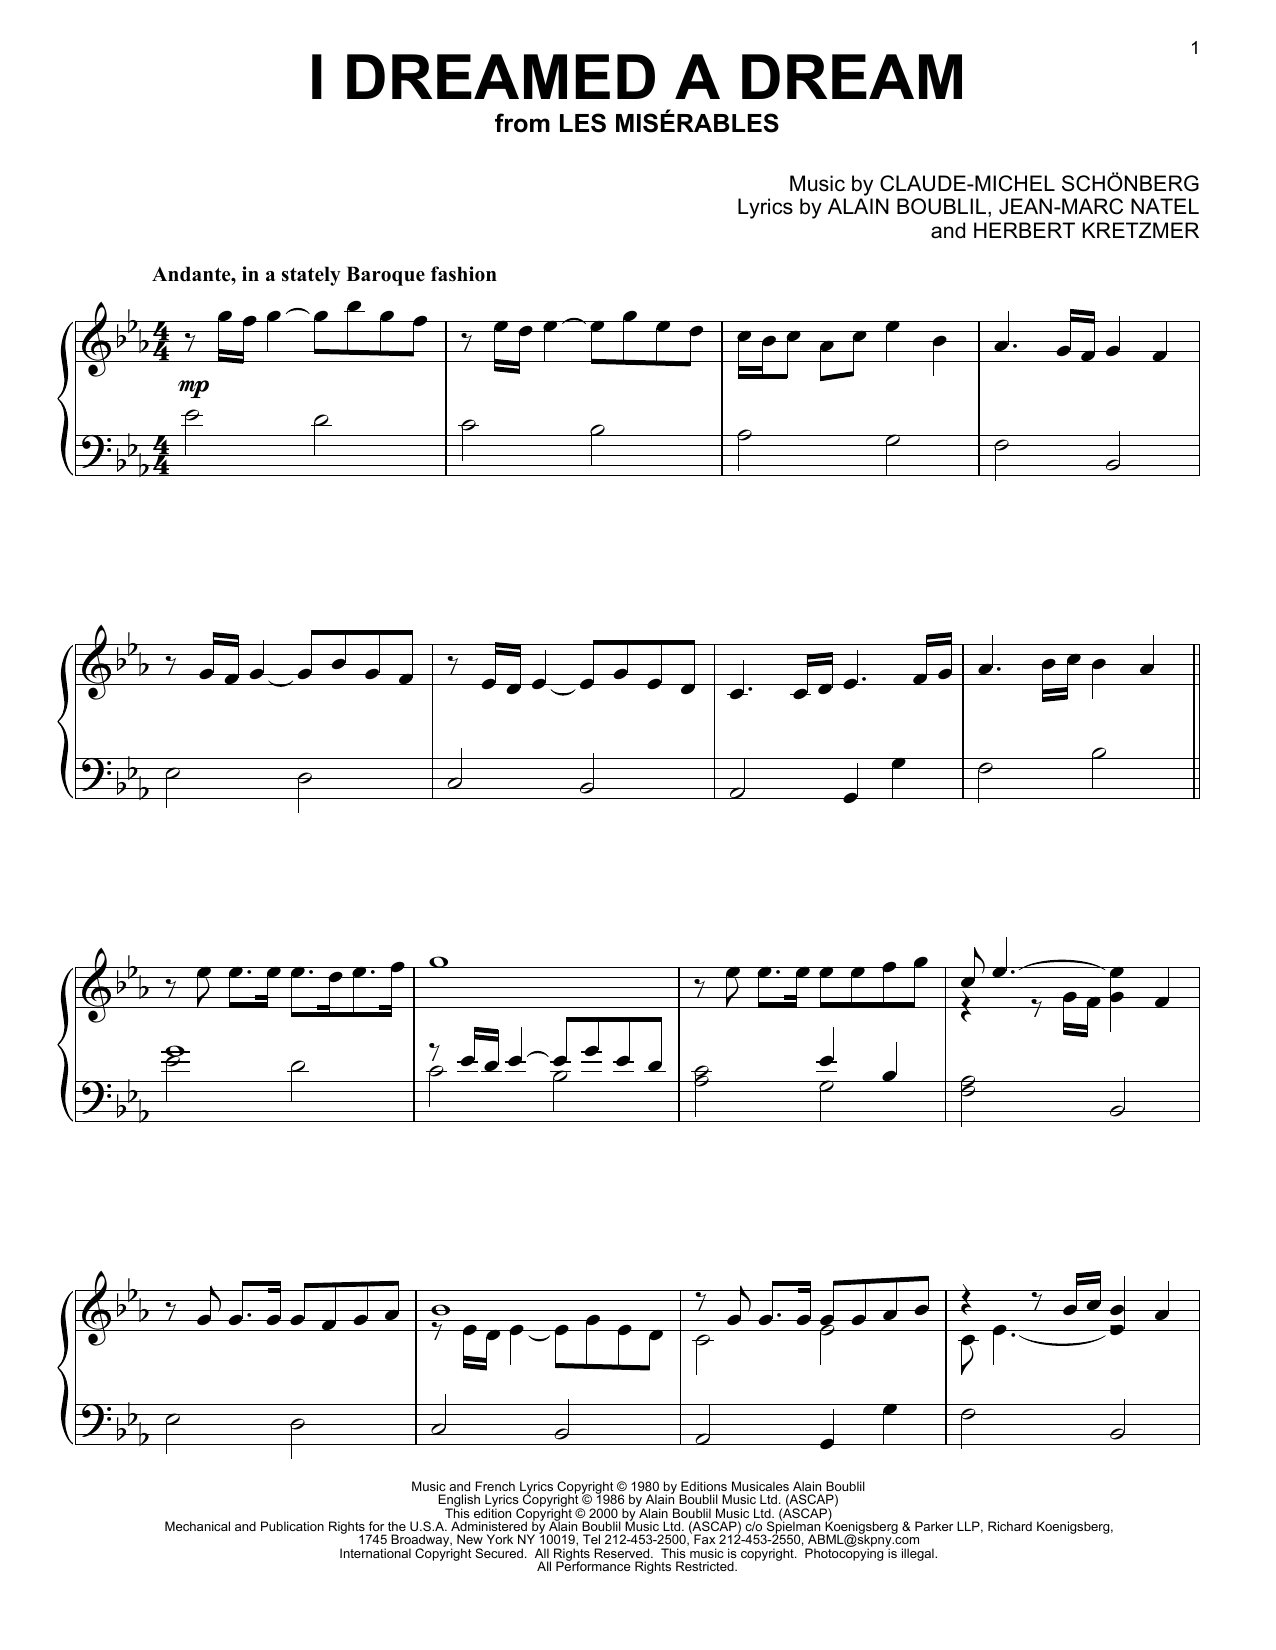 Susan Boyle I Dreamed A Dream sheet music notes and chords. Download Printable PDF.